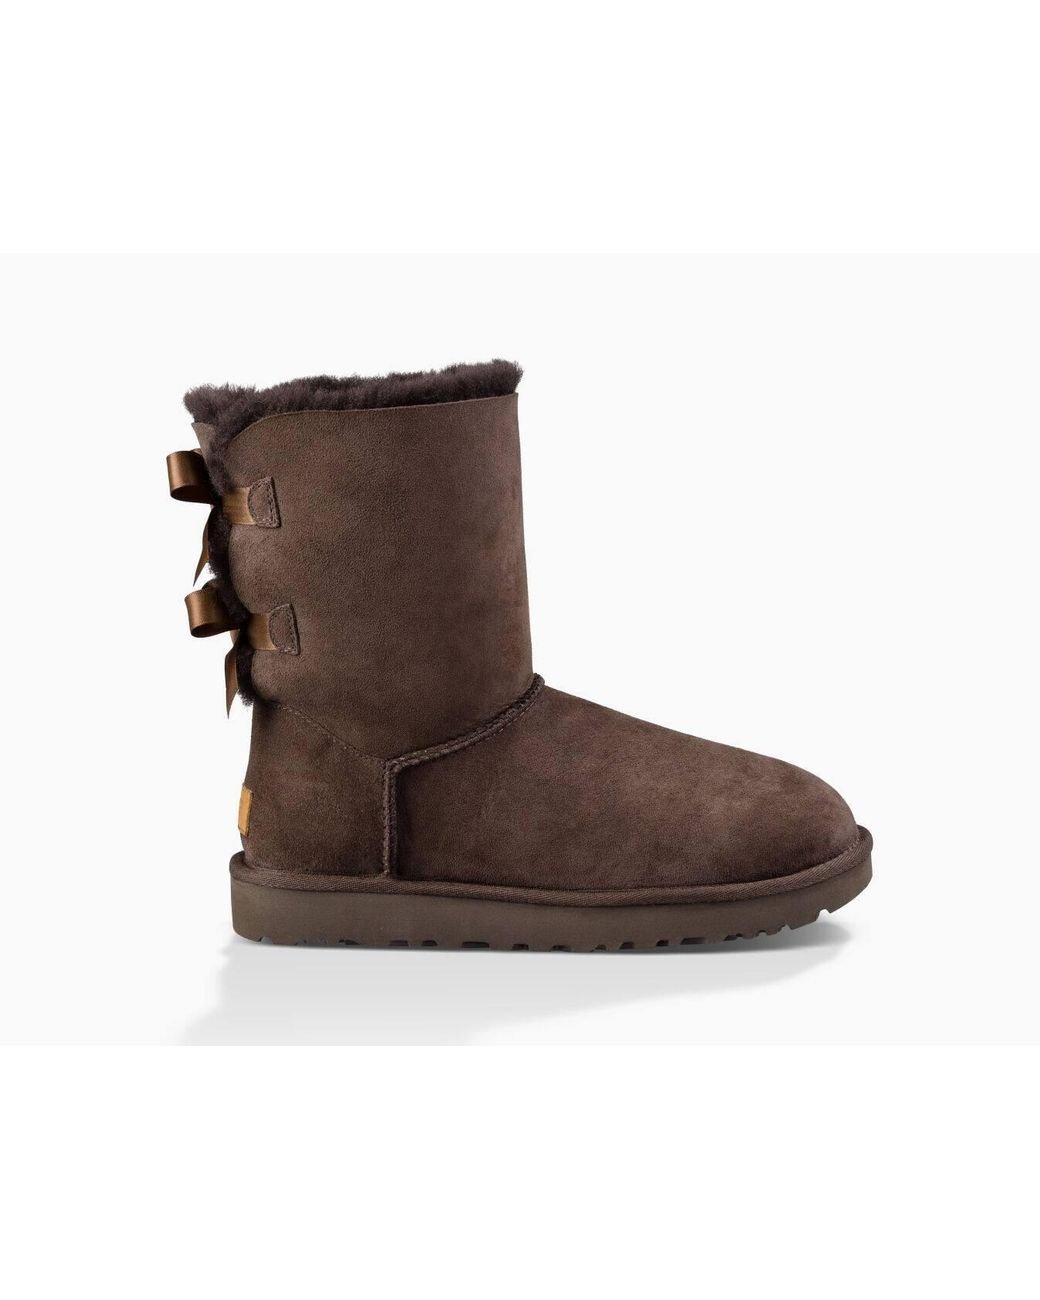 UGG Denim Bailey Bow Ii Boot in Chocolate (Brown) | Lyst